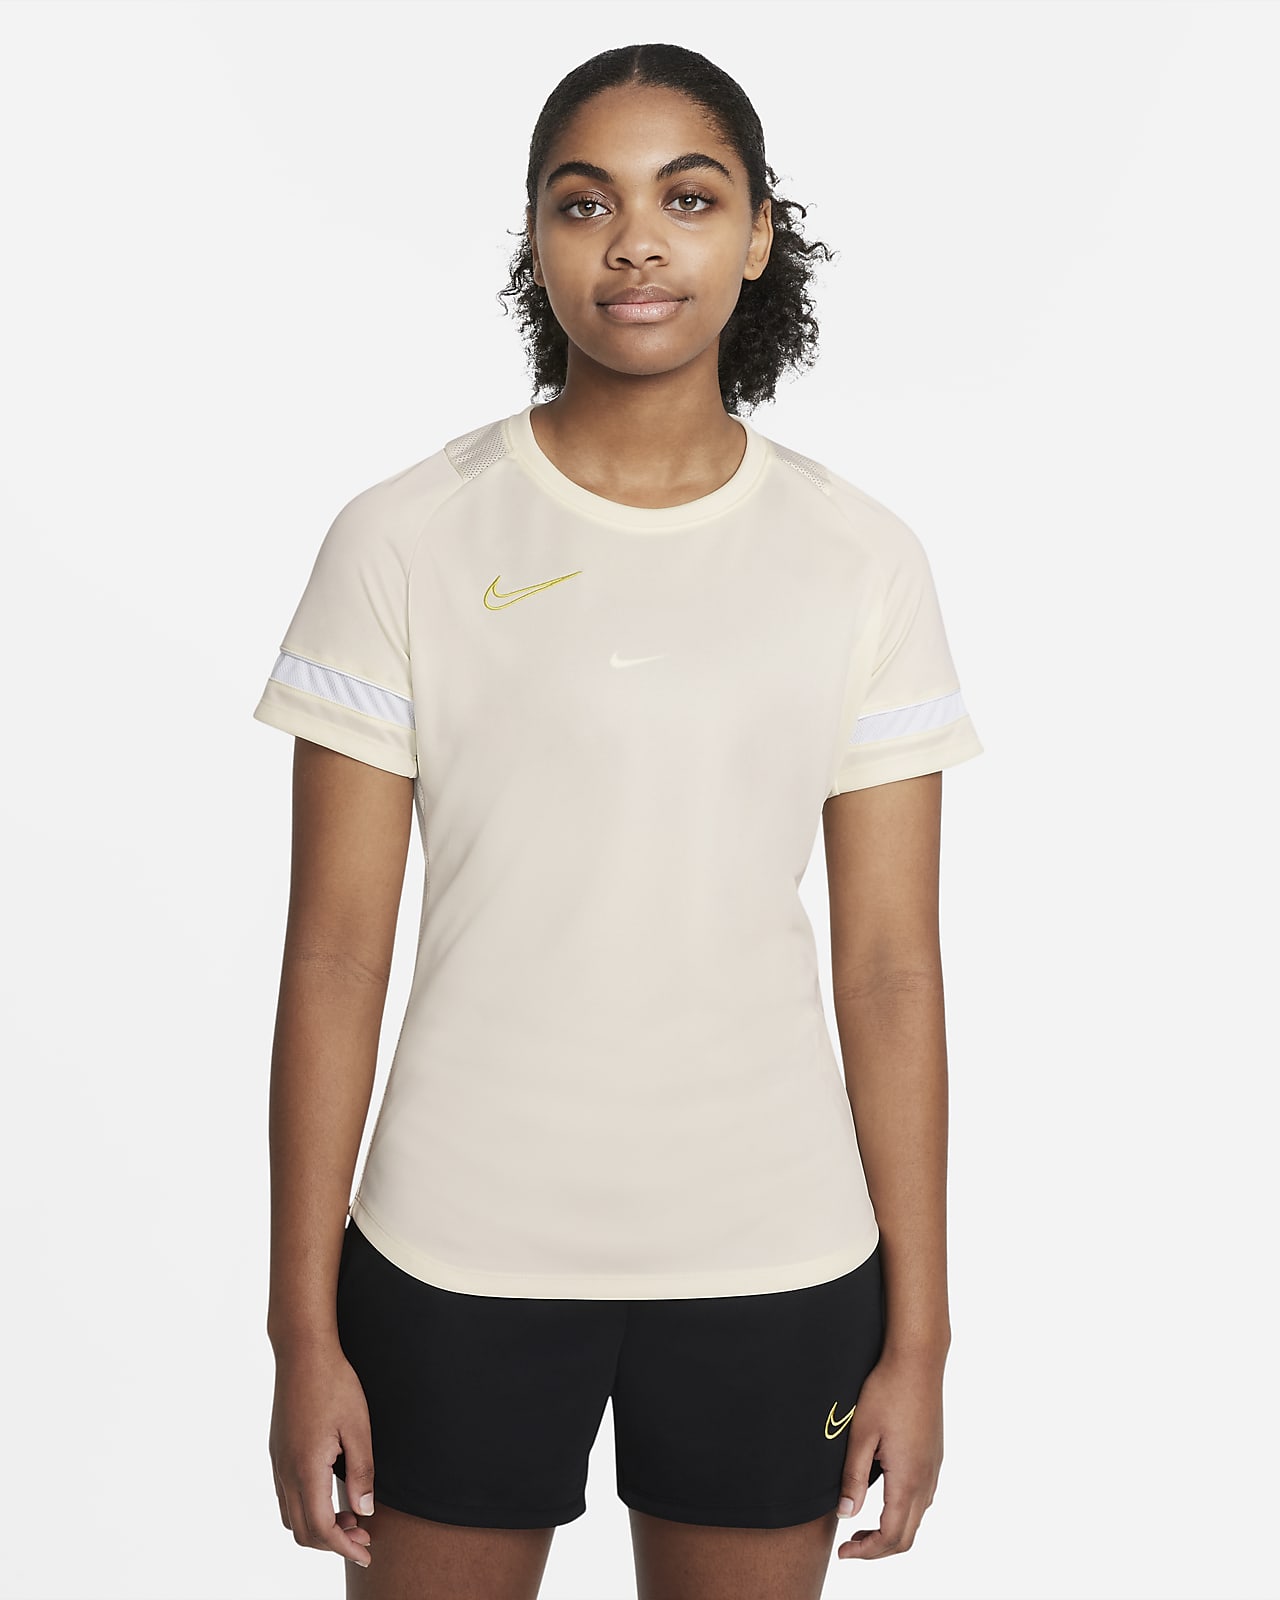 throw again Chinese cabbage Nike Dri-FIT Academy fotballoverdel til dame. Nike NO